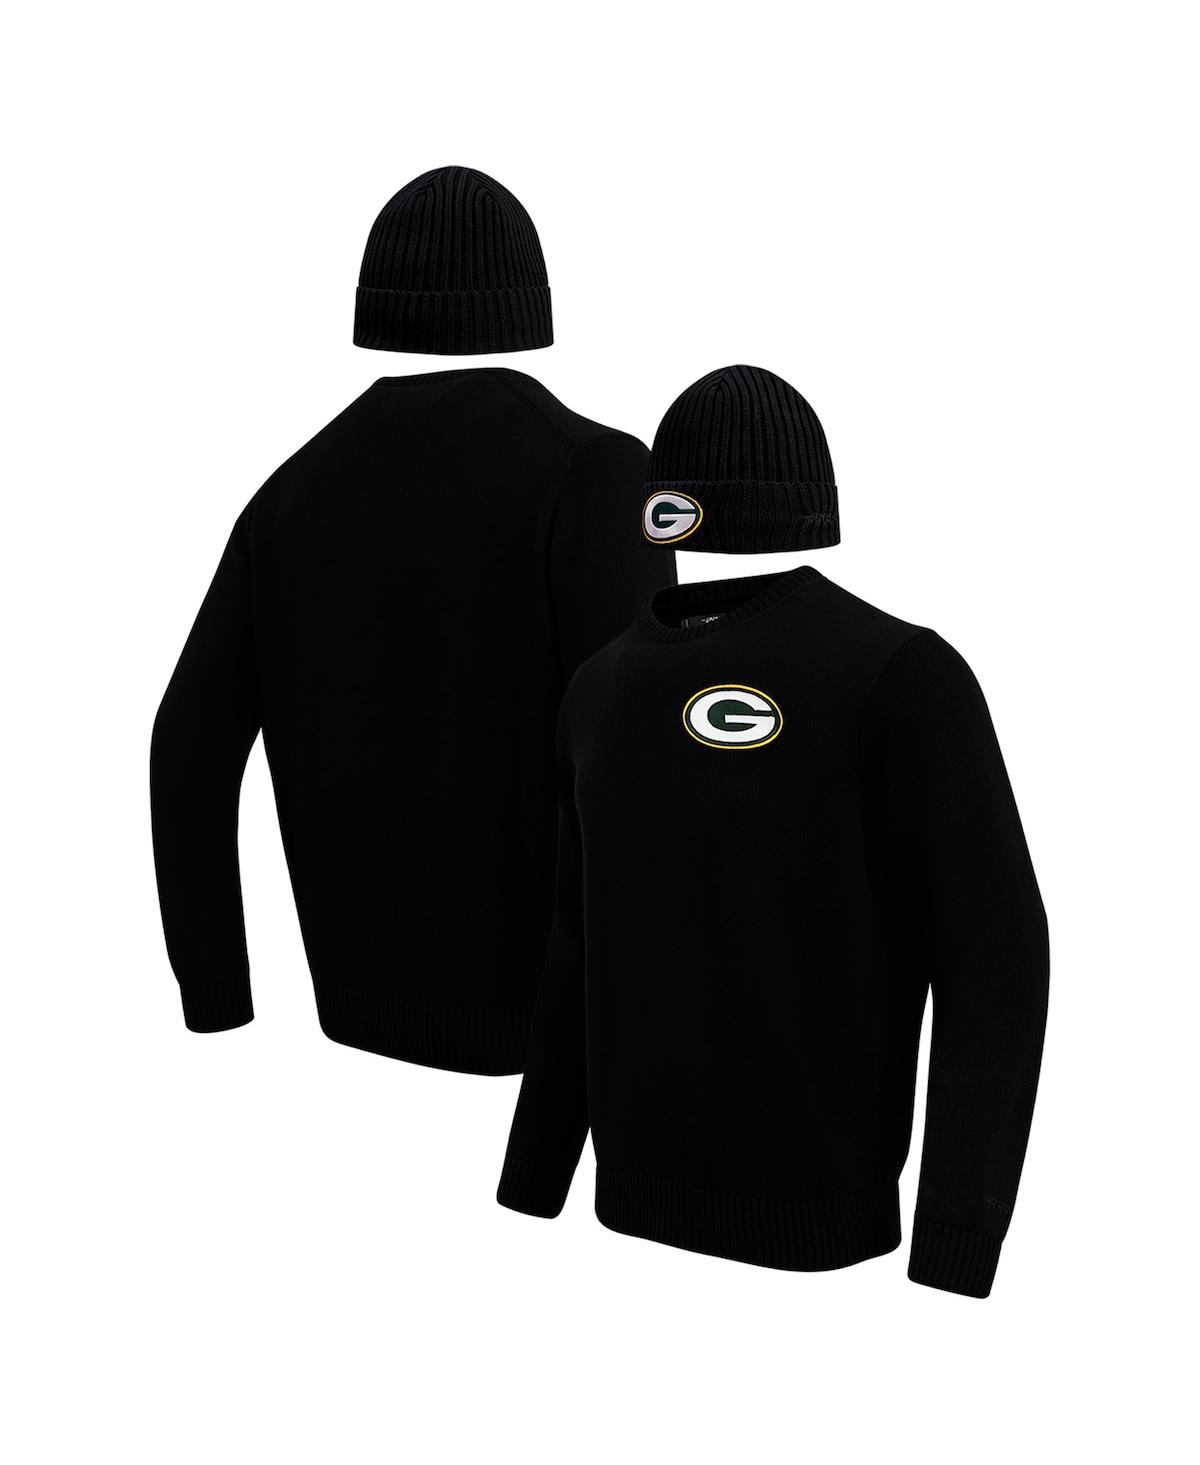 Shop Pro Standard Men's  Black Green Bay Packers Crewneck Pullover Sweater And Cuffed Knit Hat Box Gift Se